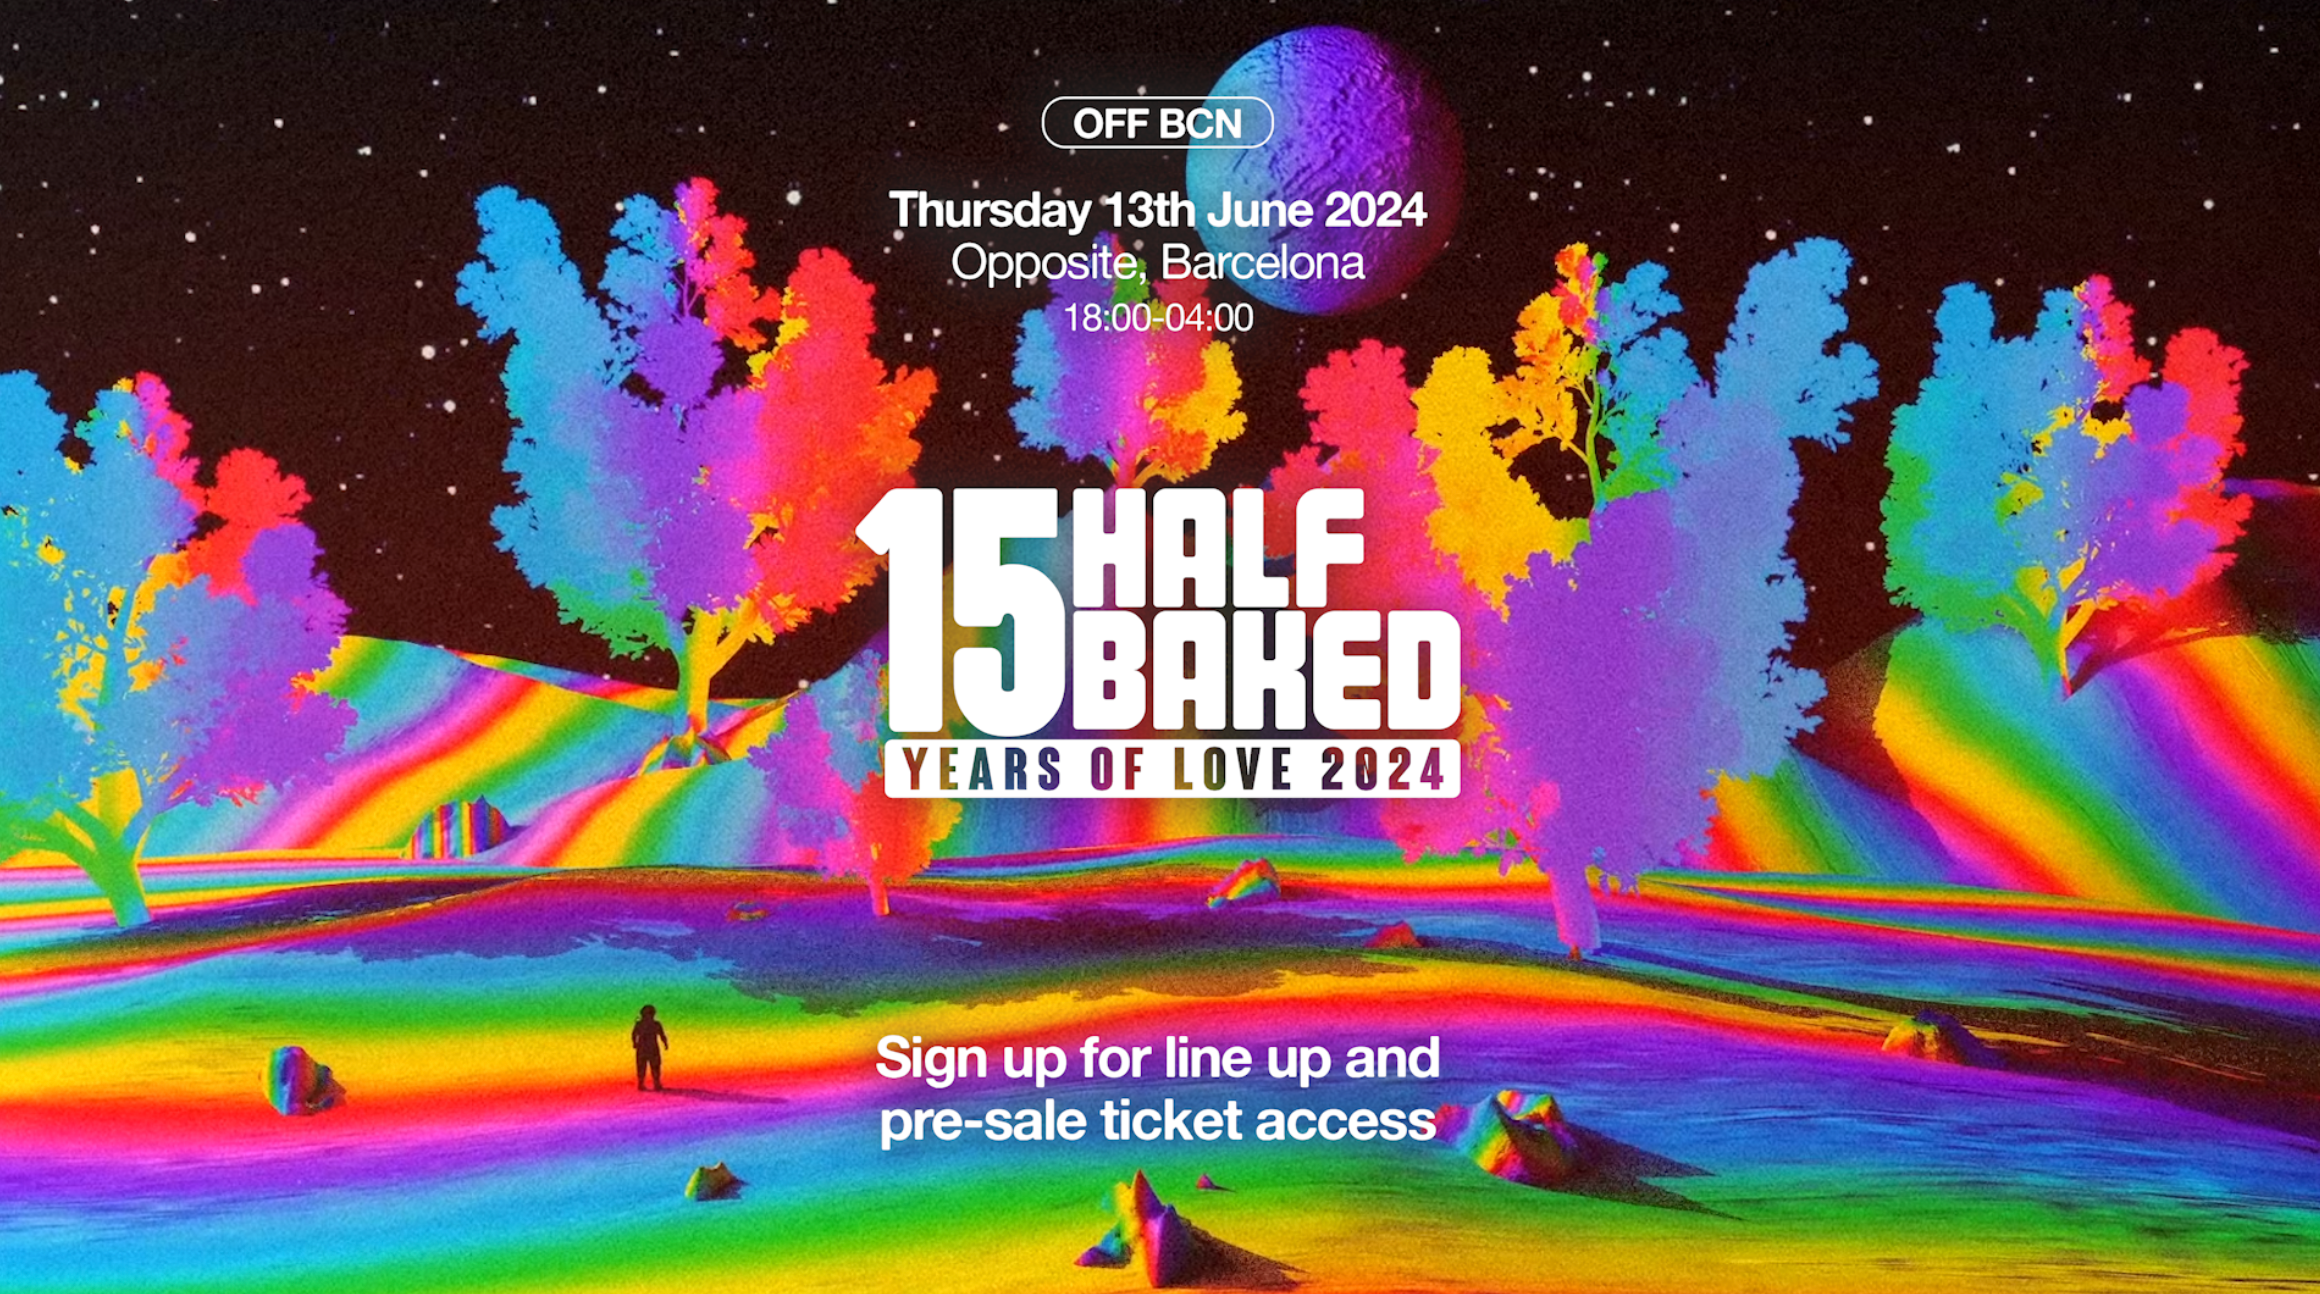 [CANCELLED] Half Baked 15th Years Of Love - OFF BCN - Página frontal